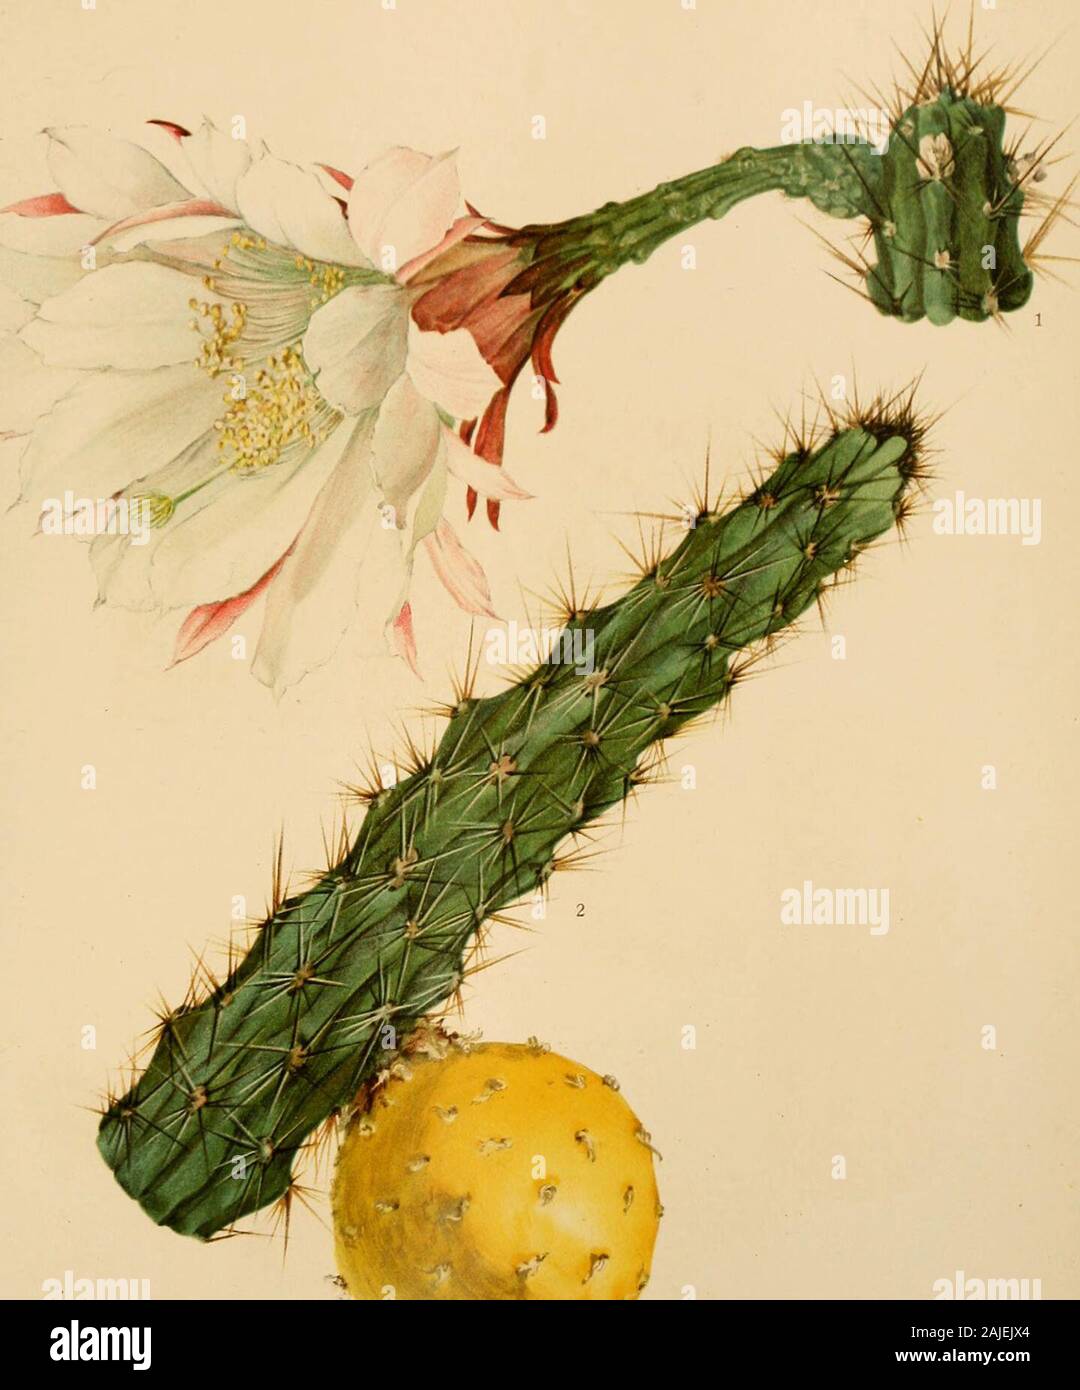 The Cactaceae : descriptions and illustrations of plants of the cactus family . th-segments denticulate. Fruit yellow 6. H. gracilis Fruit orange-red 7. H. simpsonii Hairs of the flower-areoles tawny or brown. Hairs of the flower-areoles 1 to 1.5 cm. long; color of fruit unknown; spines up to 6 cm. long 8. H. fernowl Hairs of flower-areoles 7 mm. long or less; fruit yellow; spines much shorter 9. H. aboriginum BB. Plants prostrate and pendent on rocks 10. H. earlel AA. Fruit red, often splitting (Eriocereus).Joints aeveral-ribbed or subterete.Ribs of the joints prominent.Ribs not tubercled. Pl Stock Photo